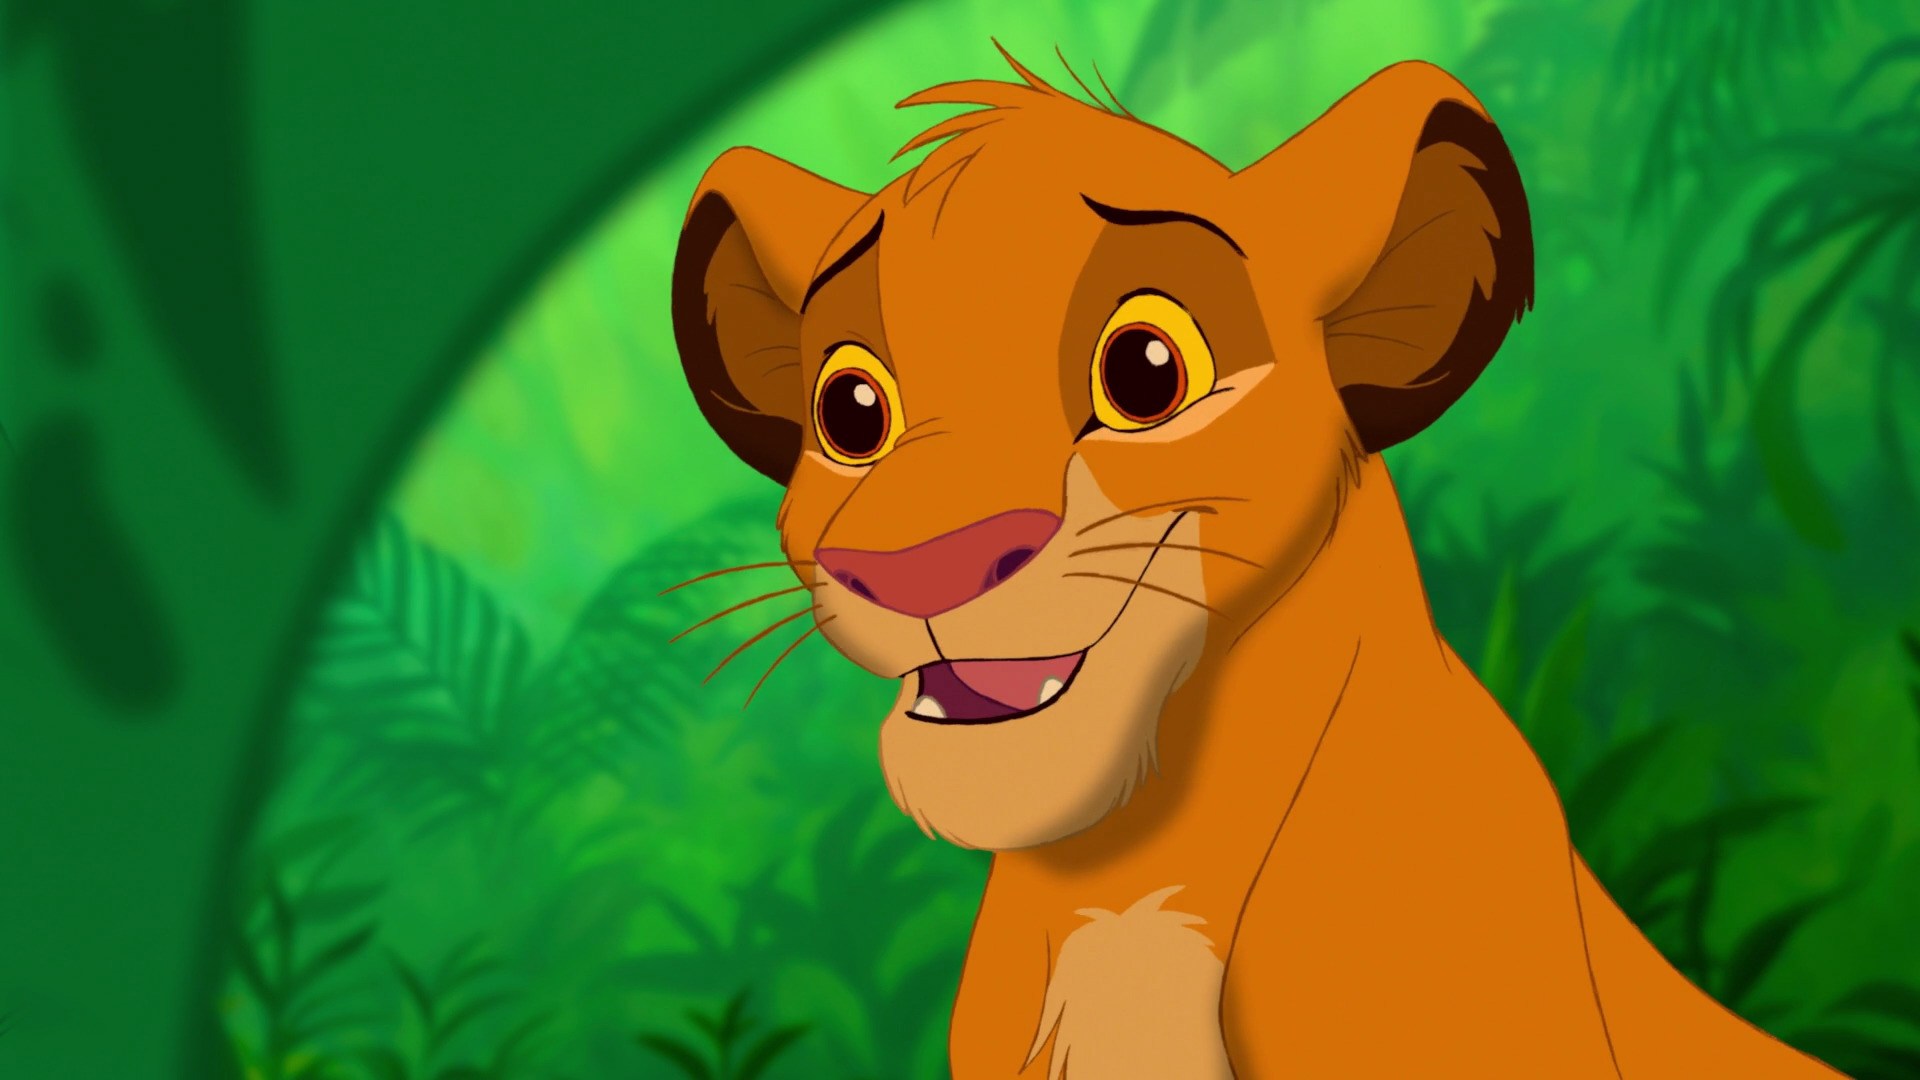 How to watch the original Lion King movie before the remake comes out